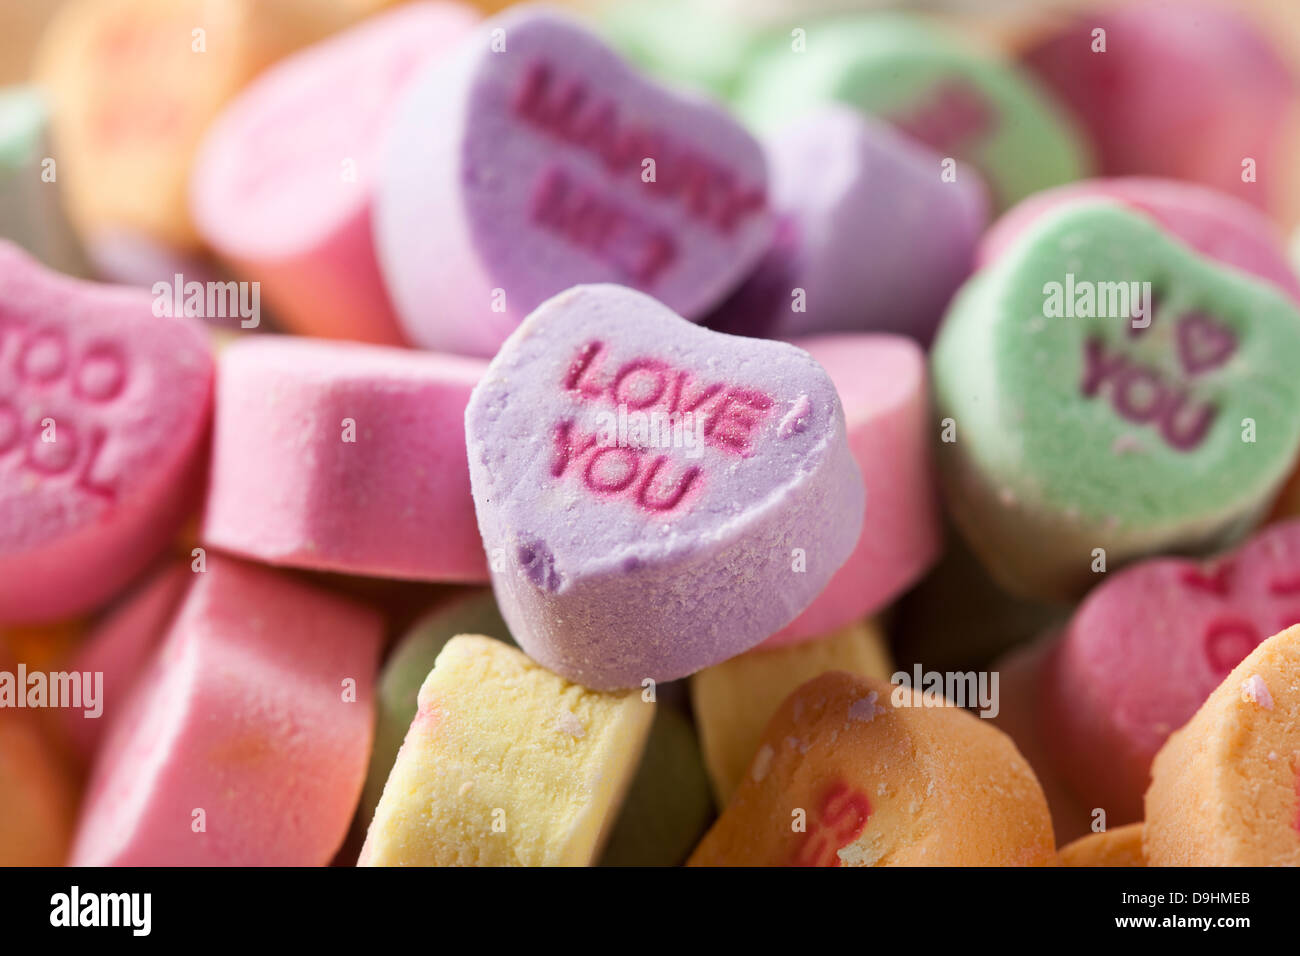 576 Valentines Day Conversation Hearts Stock Photos - Free & Royalty-Free  Stock Photos from Dreamstime